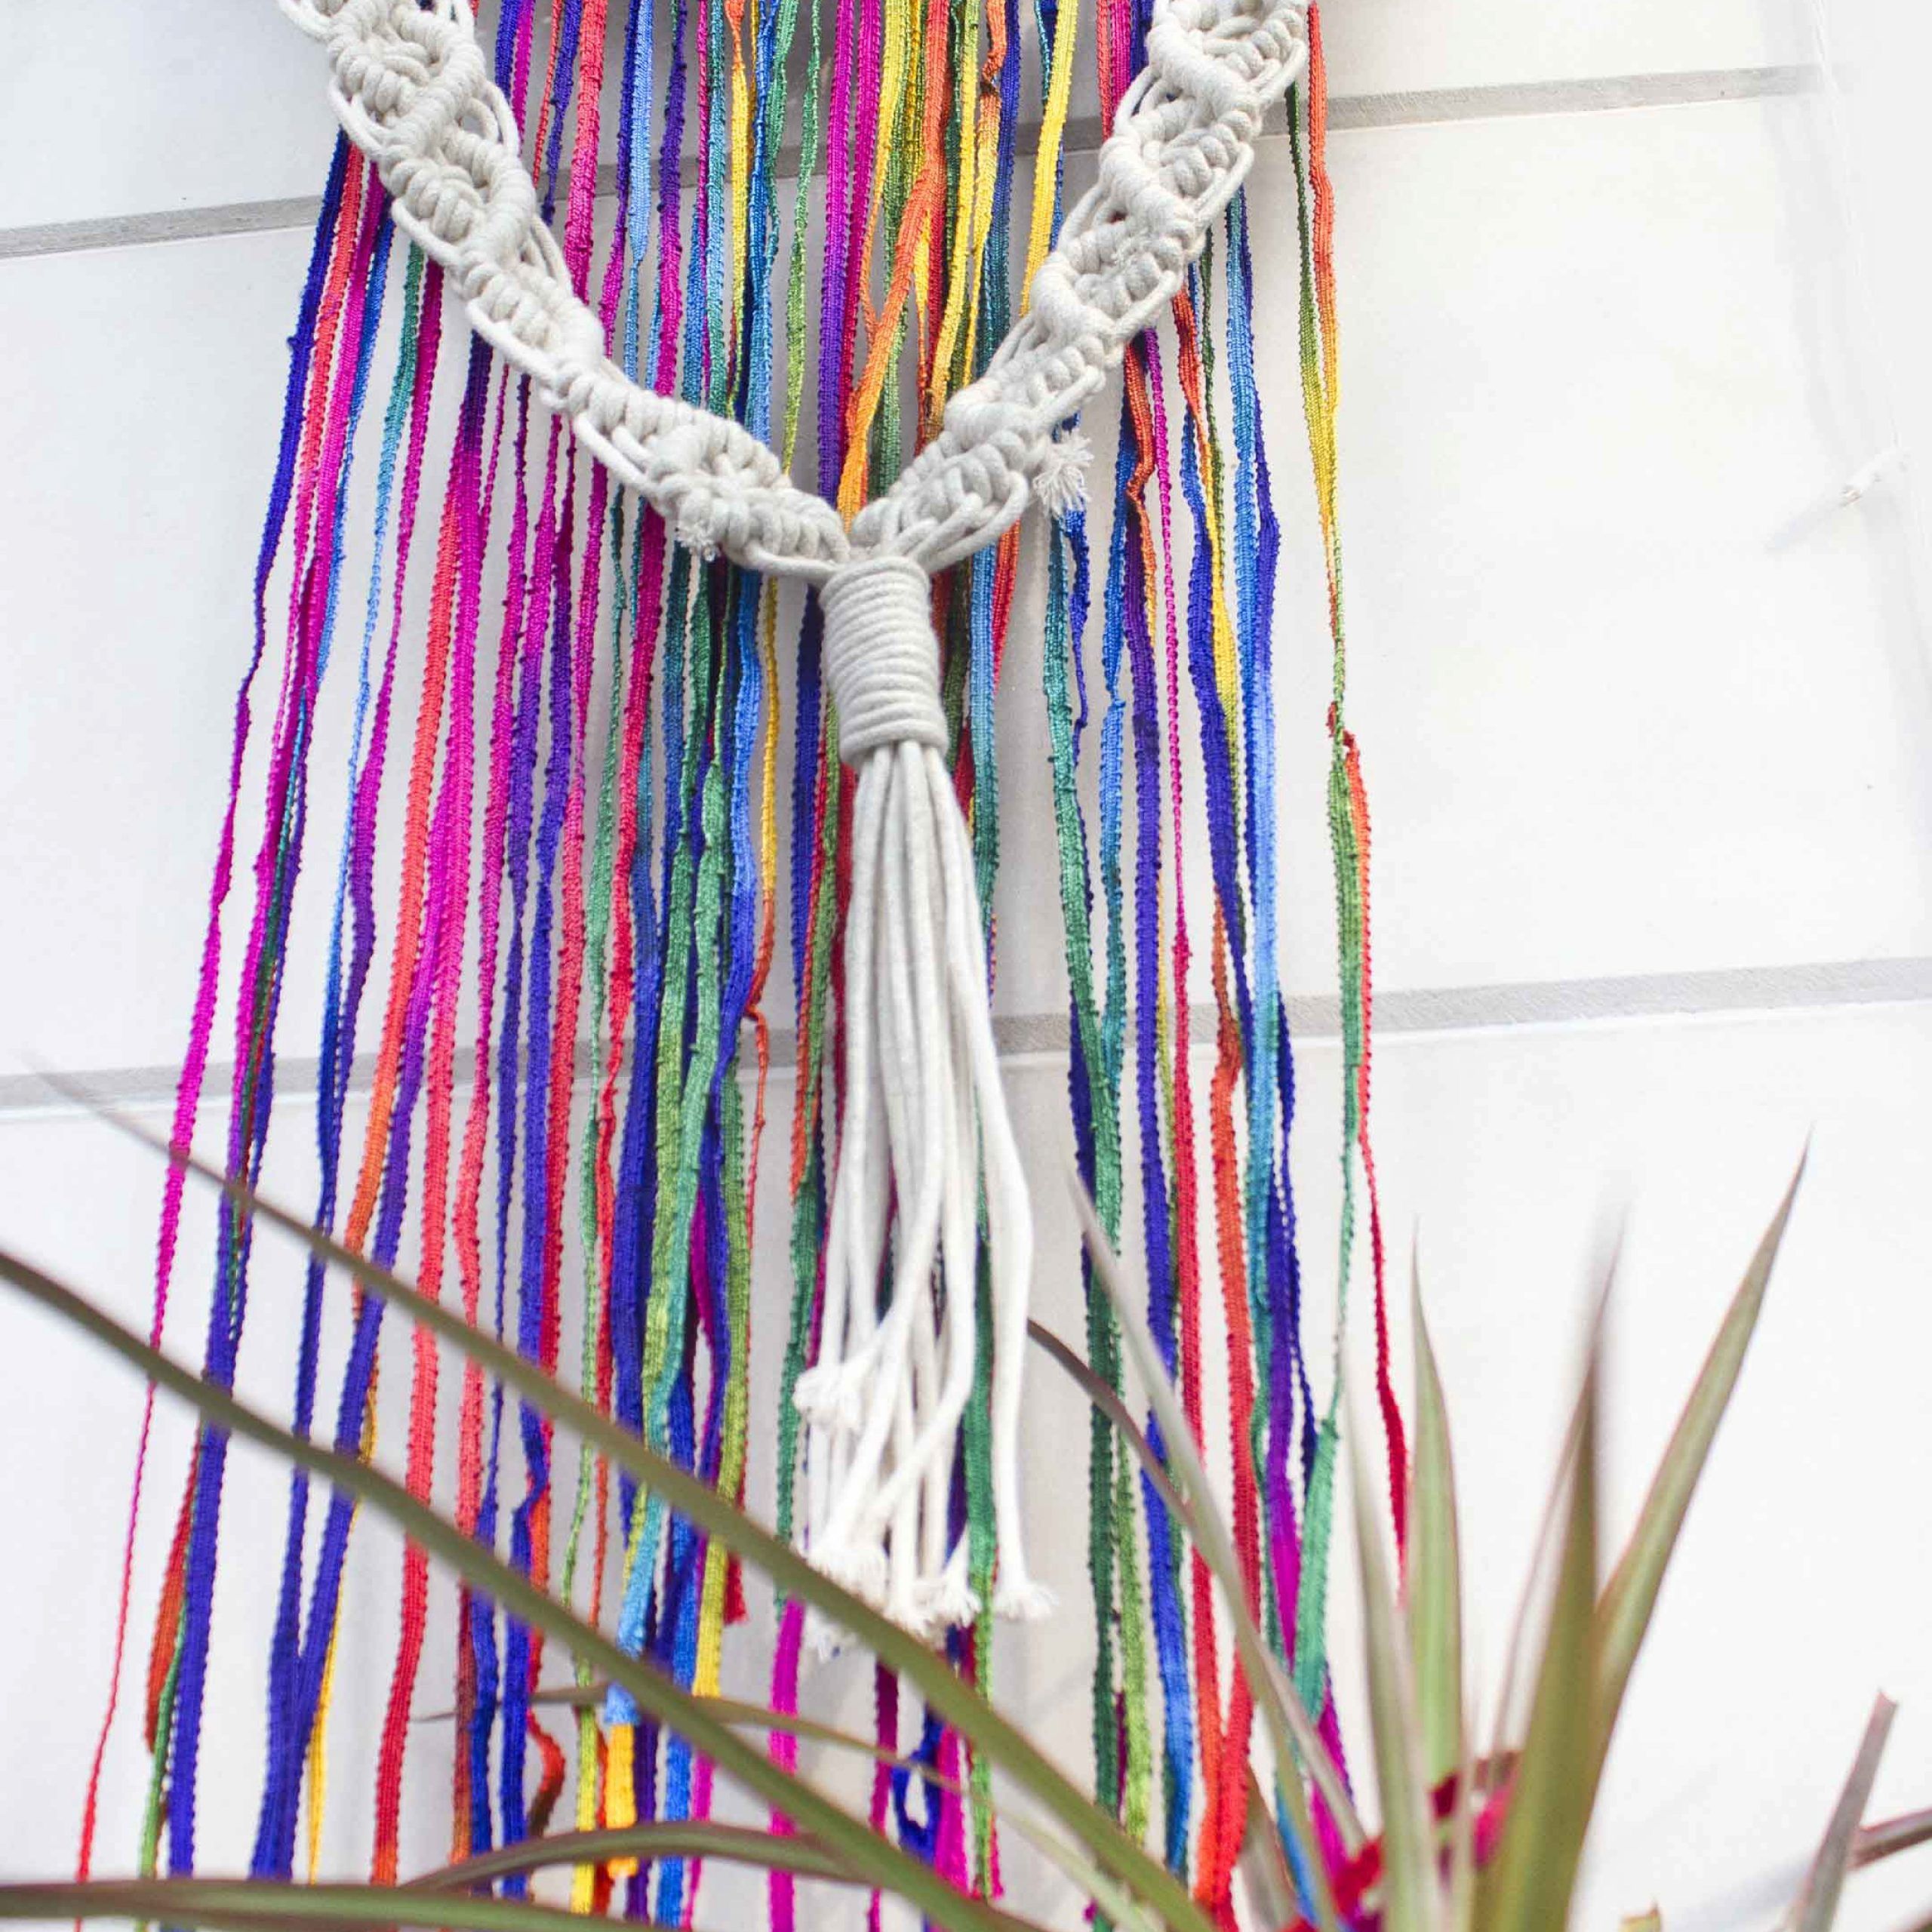 Rainbow Macrame Wall Hanging – Wall Accents Wall Art Home Throughout Favorite Rainbow Wall Art (View 2 of 20)